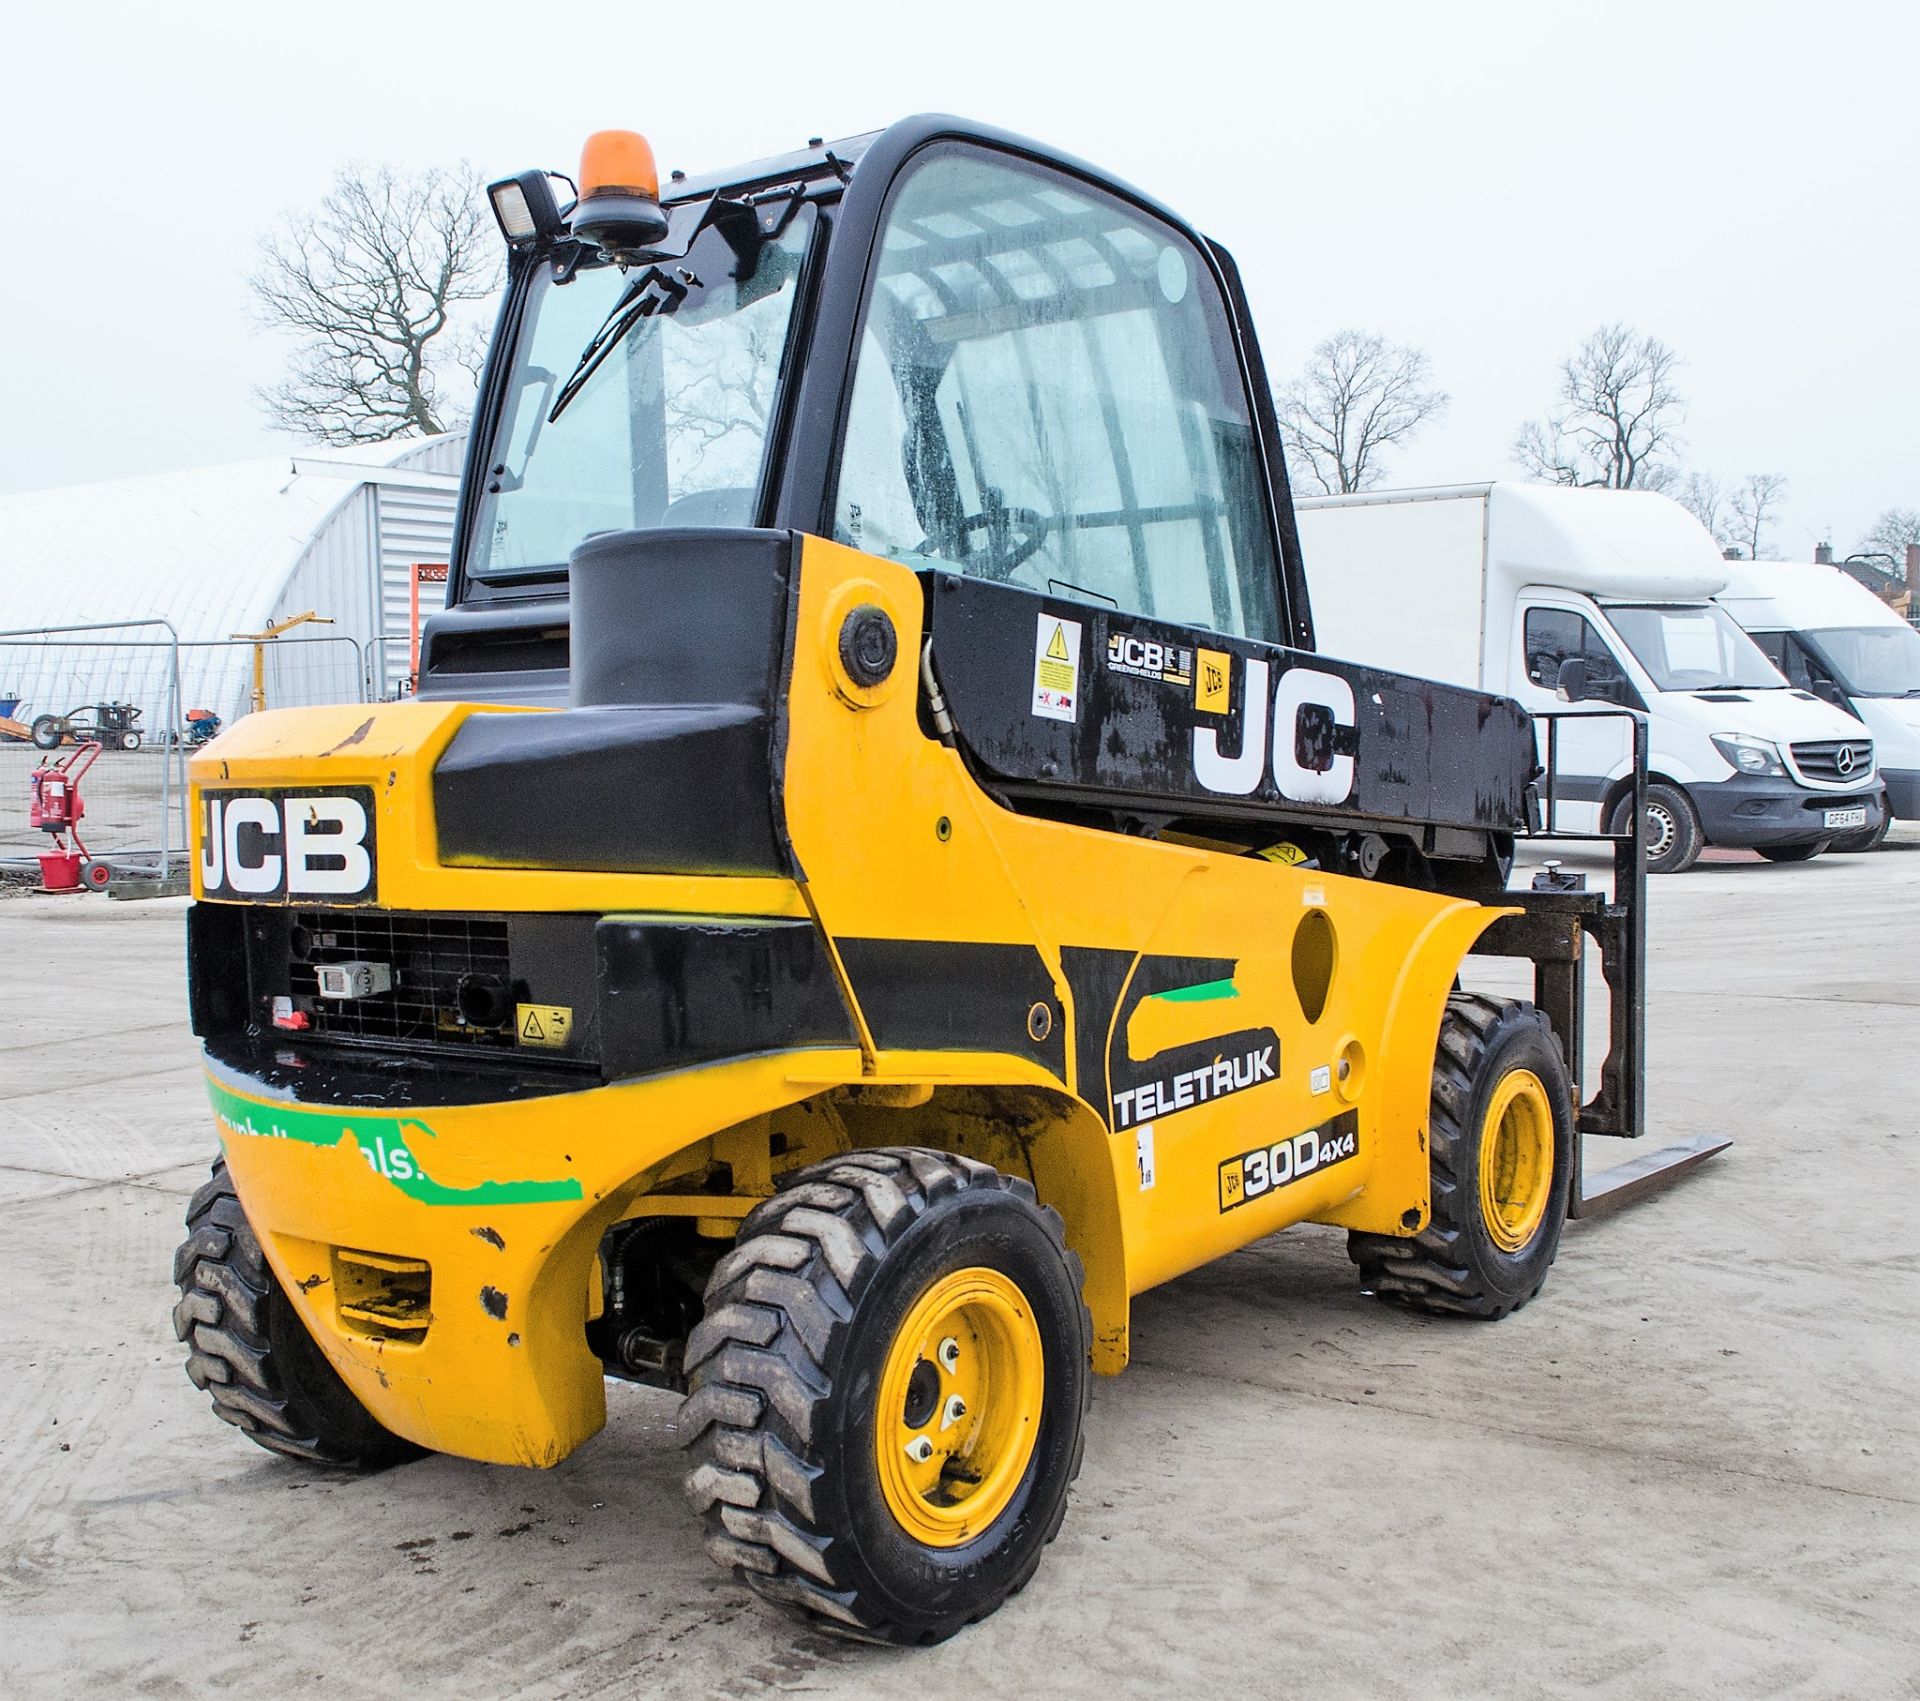 JCB Teletruk 30D 4x4 telescopic fork lift truck Year: 2013 S/N: 1541935 Recorded Hours: 1127 A623434 - Image 3 of 24